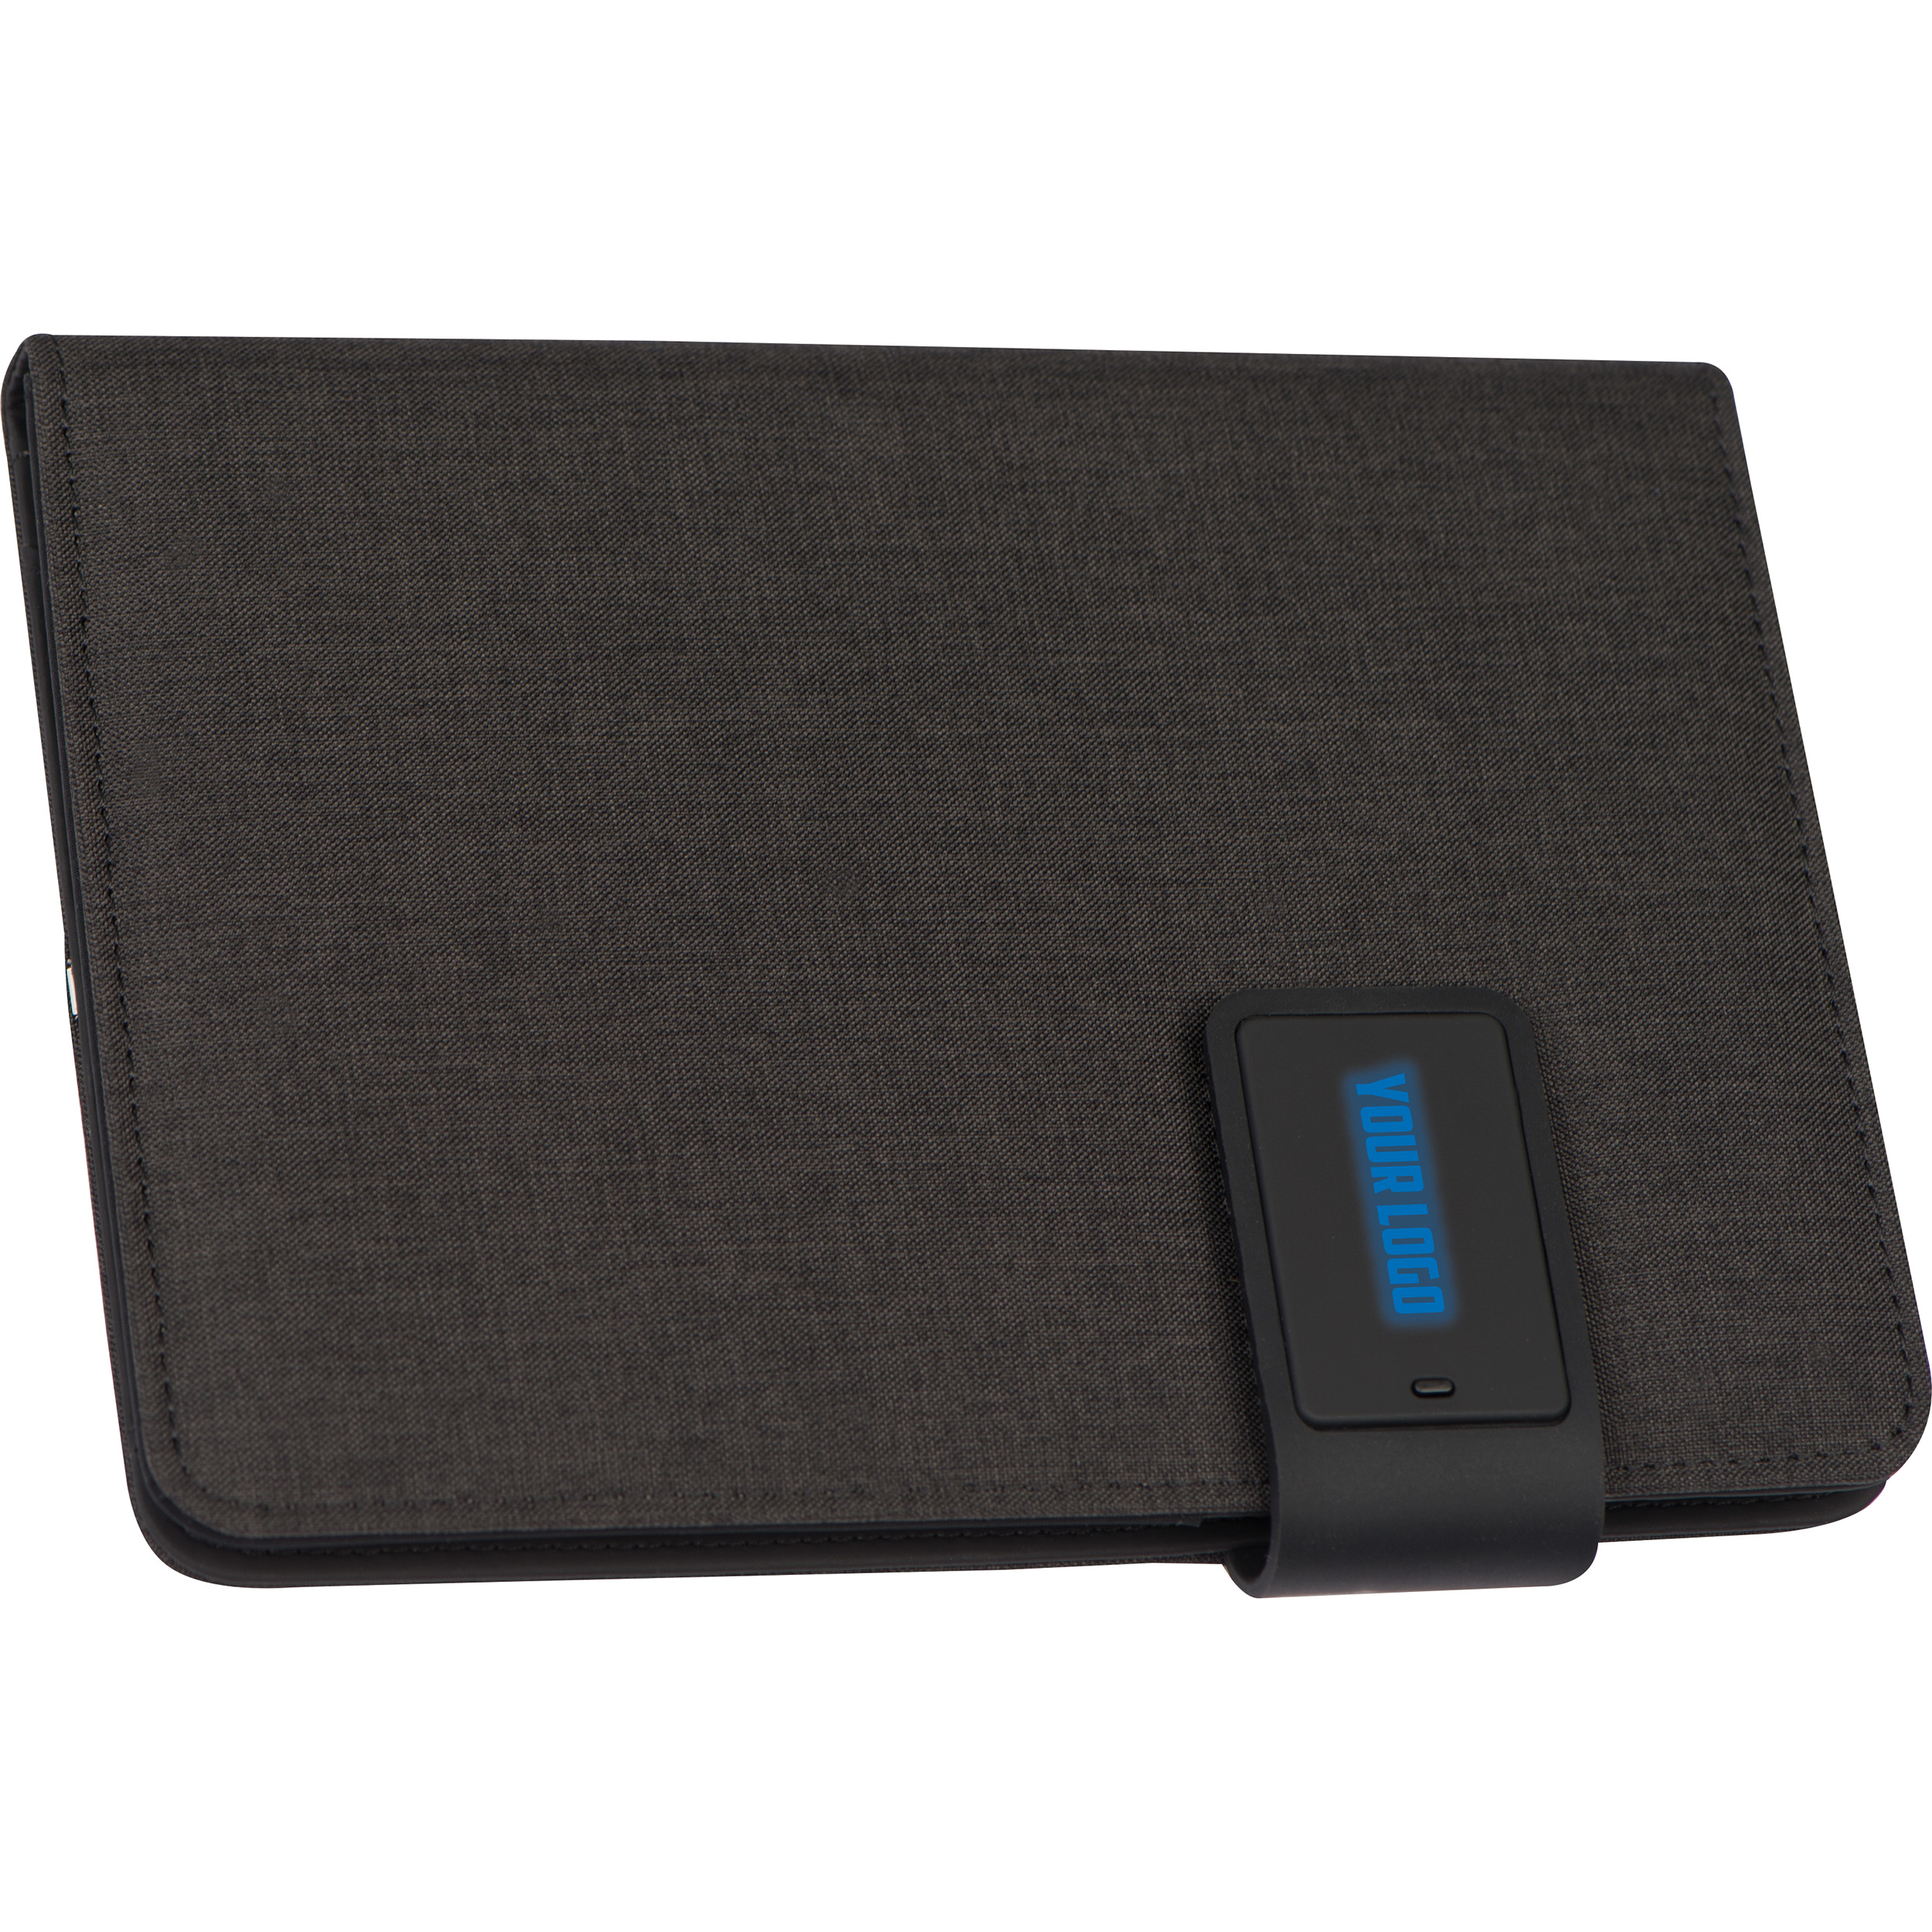 DIN A5 notebook with integrated LED light and powerbank